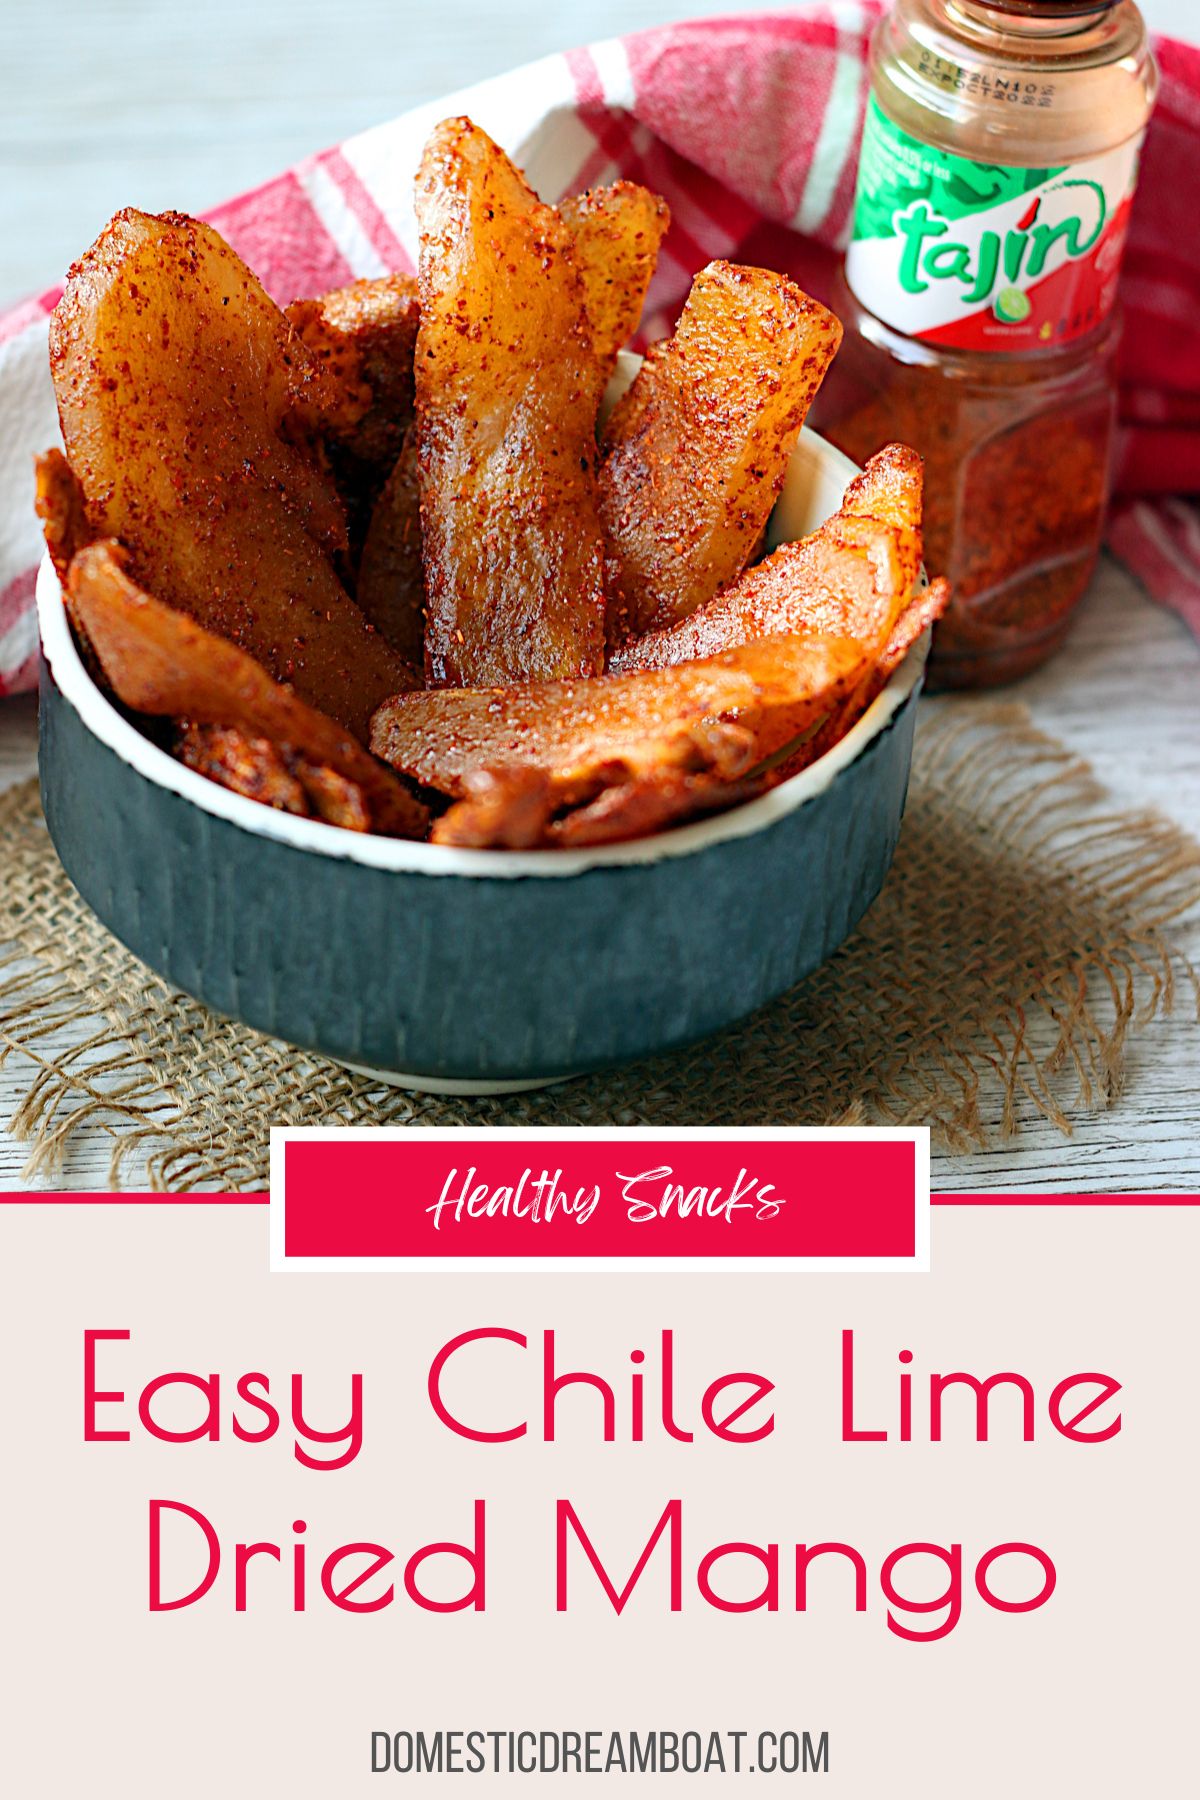 Easy Chile Lime Dried Mango